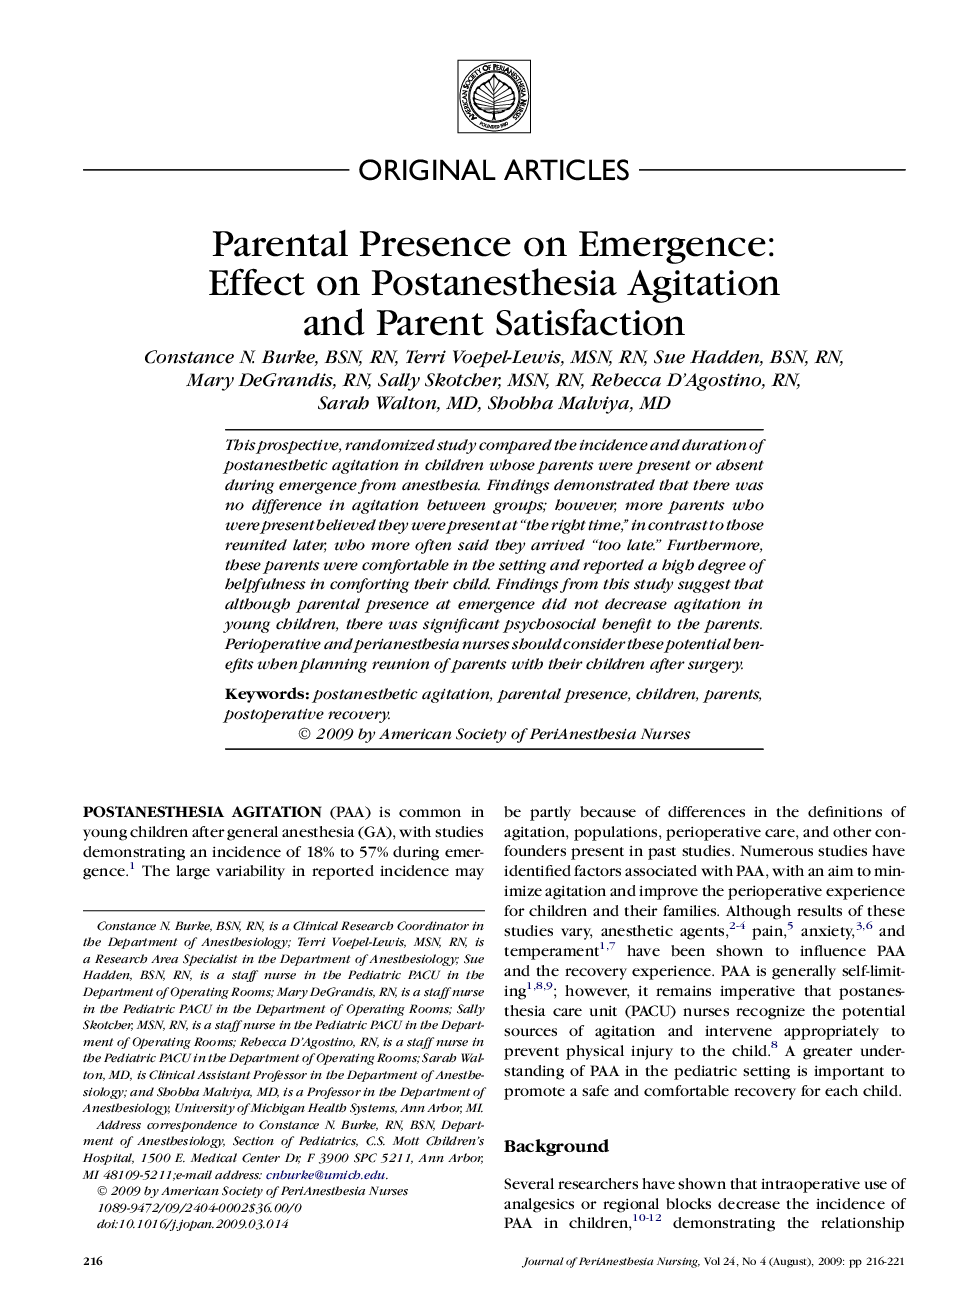 Parental Presence on Emergence: Effect on Postanesthesia Agitation and Parent Satisfaction